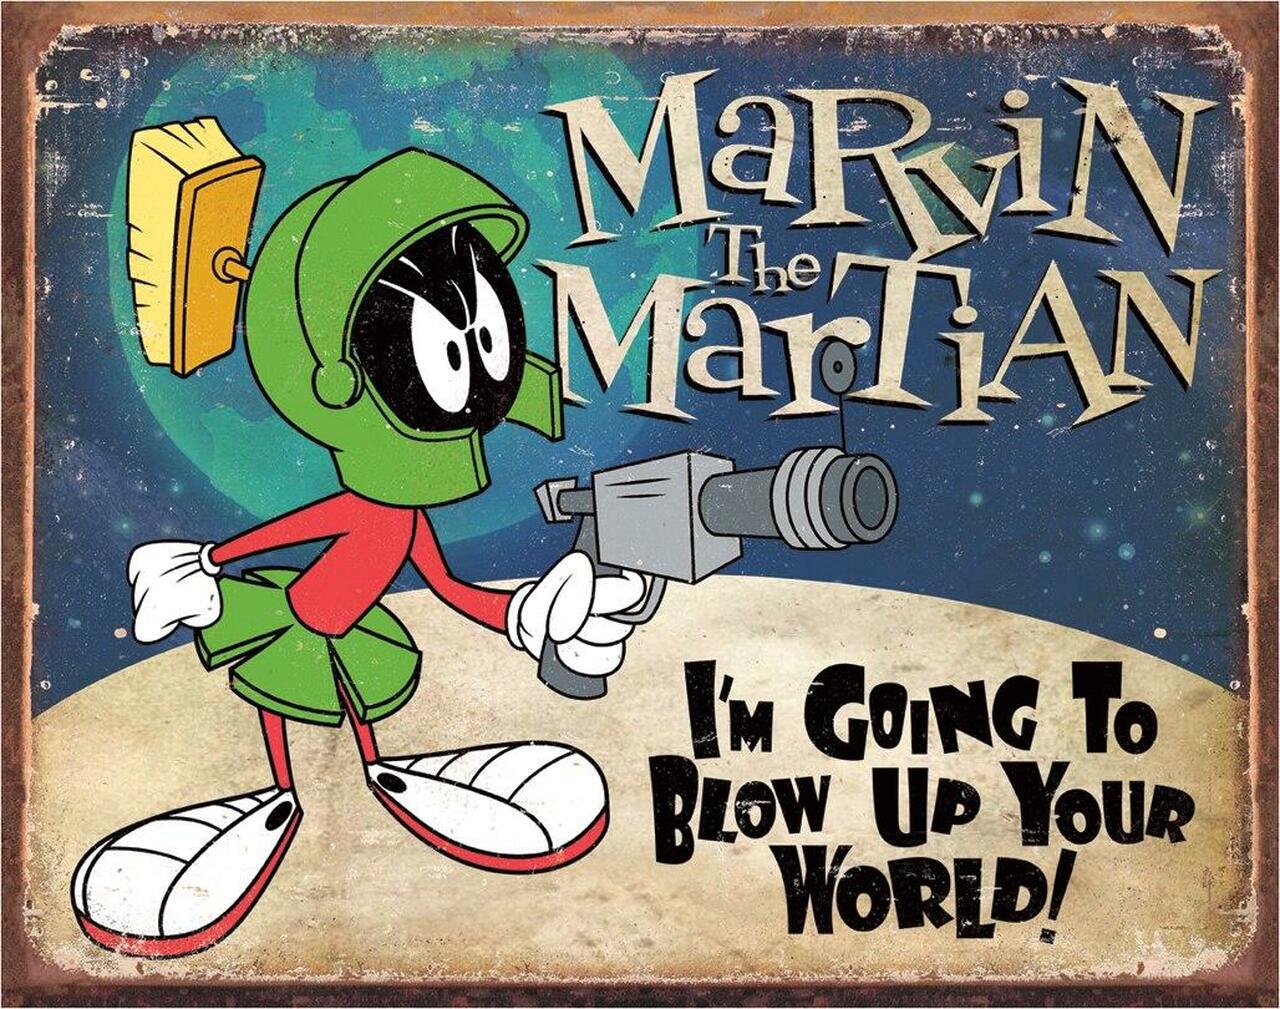 I'm Going To Blow Up Your World..Marvin Sign